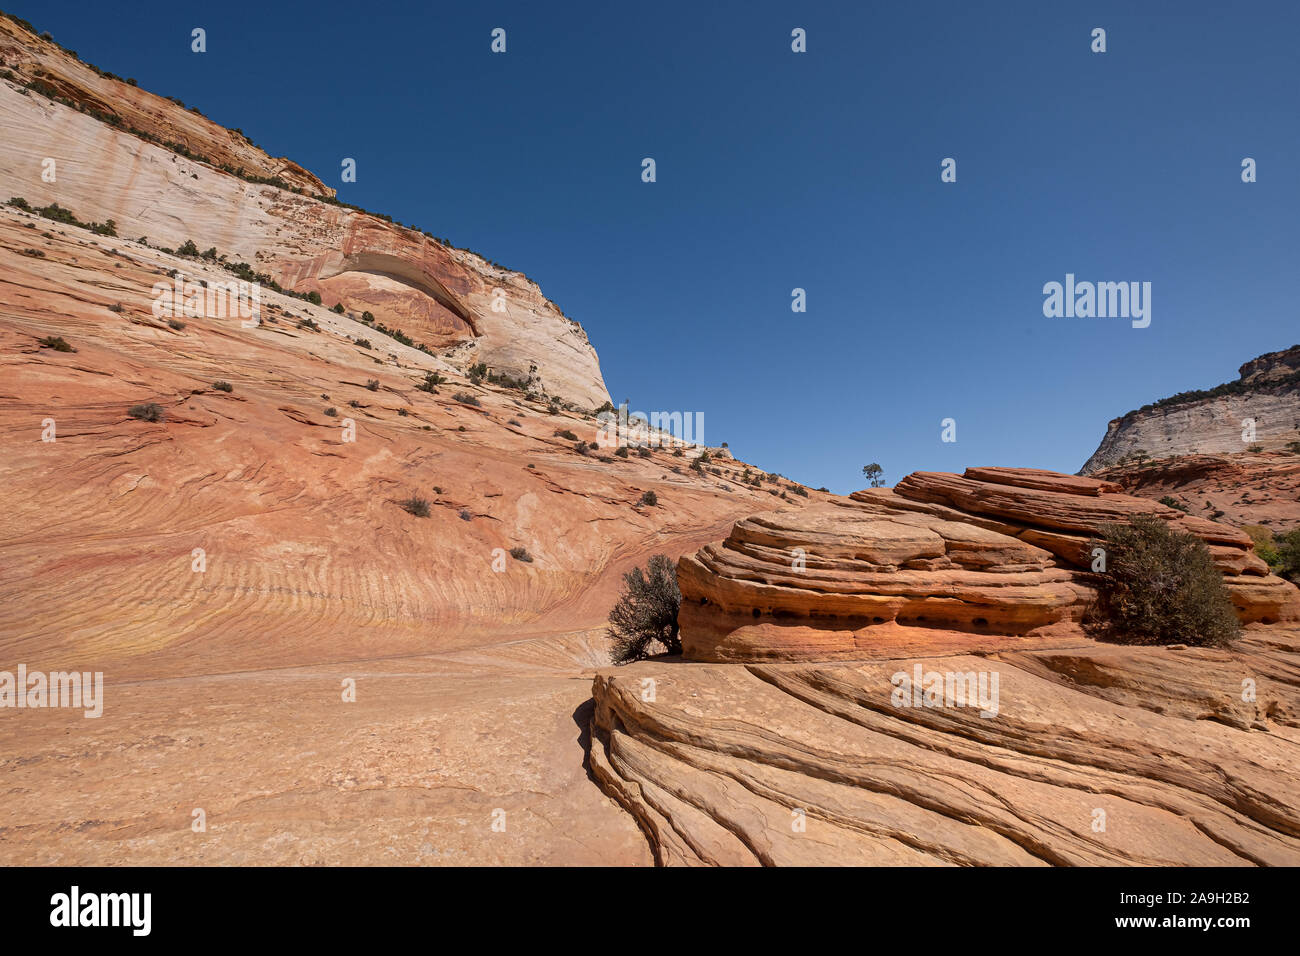 Red rock formations in Zion National Park, États-Unis Banque D'Images